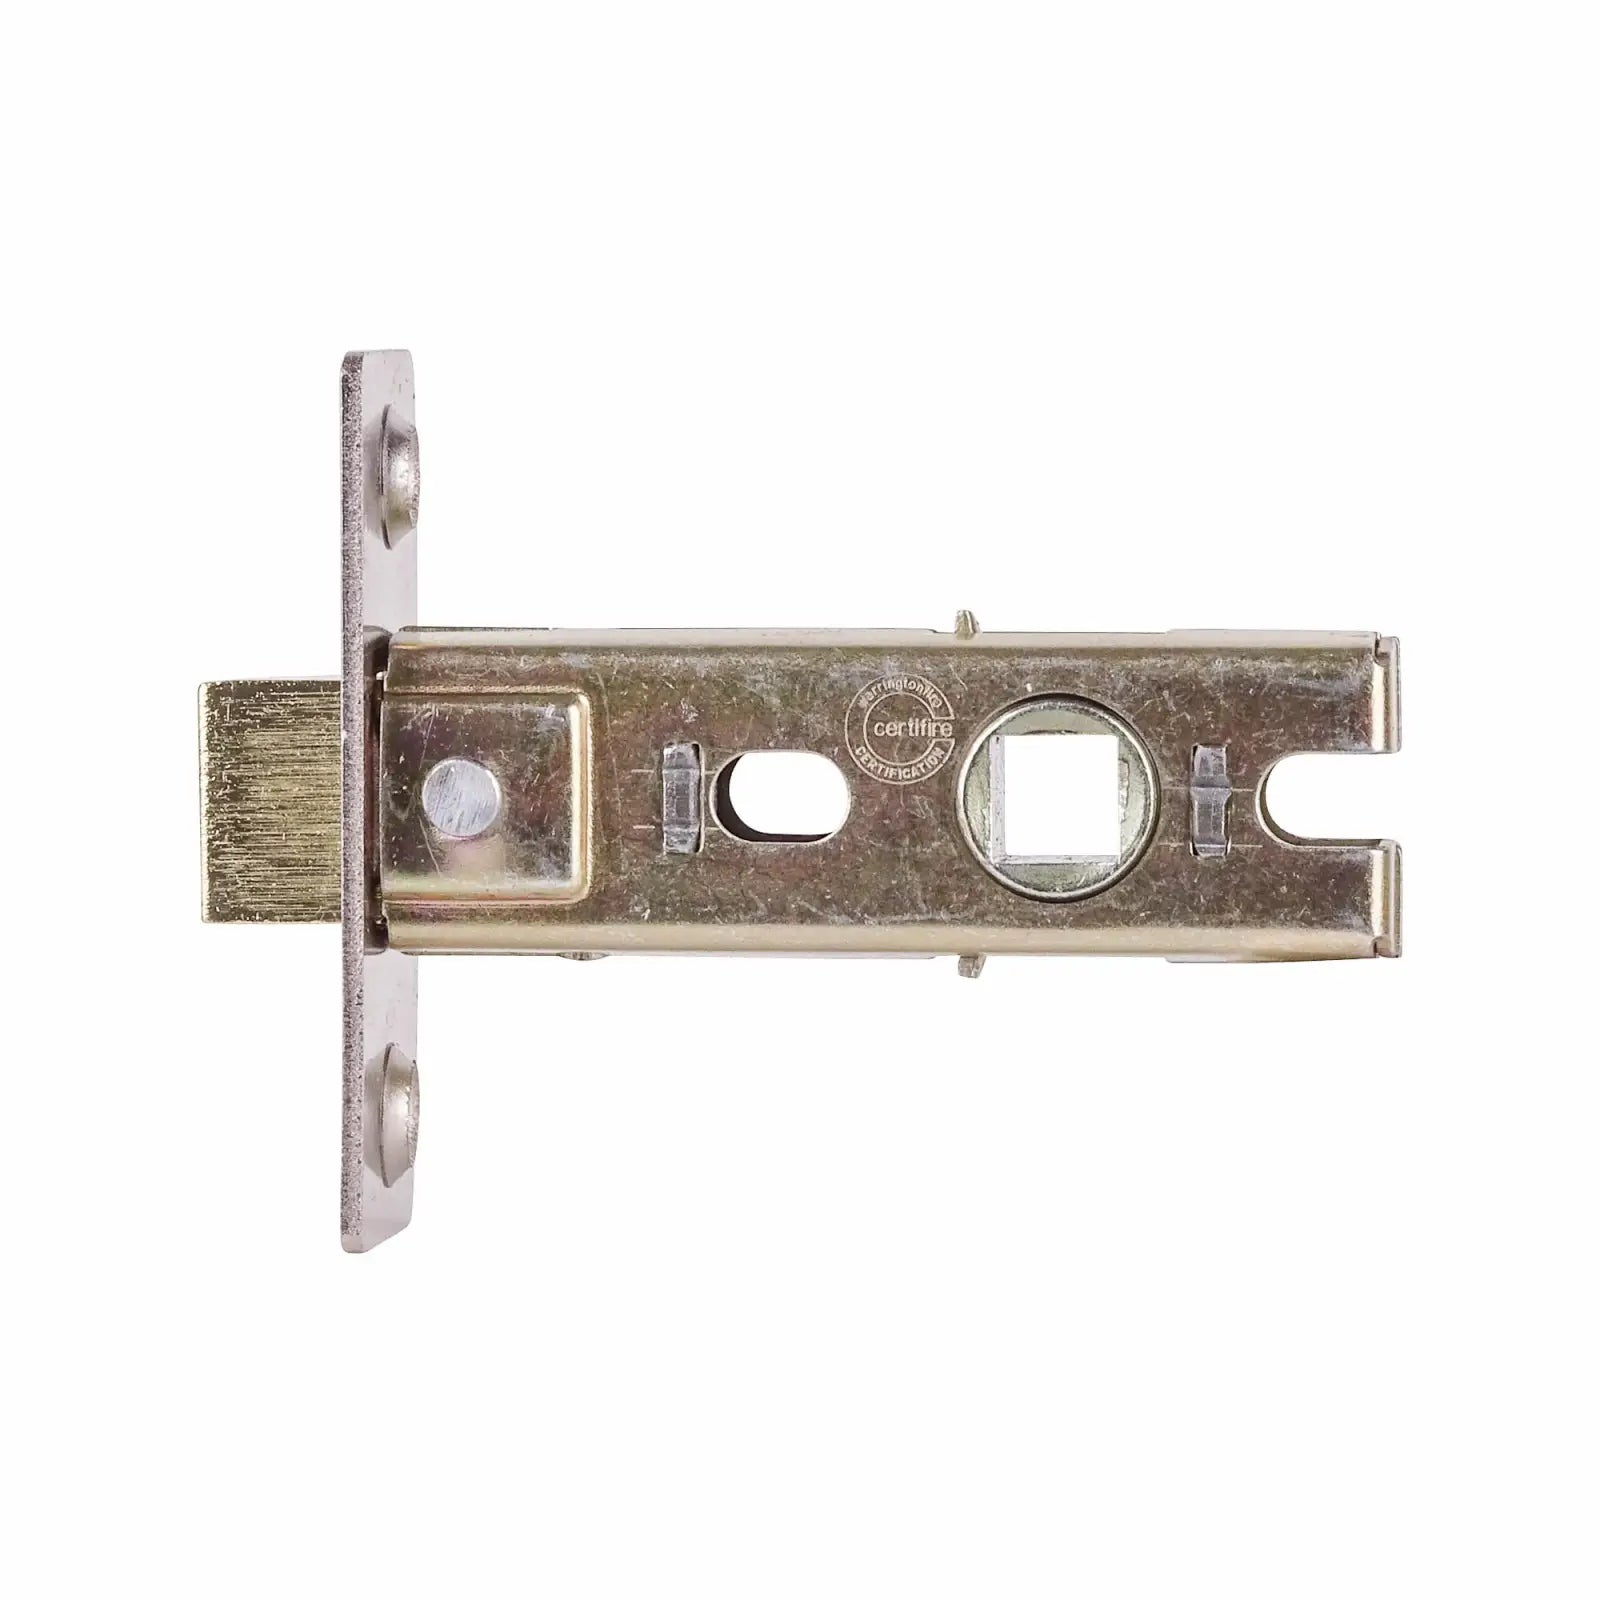 Fire Rated Tubular Mortice Latch - 76mm - Satin Nickel